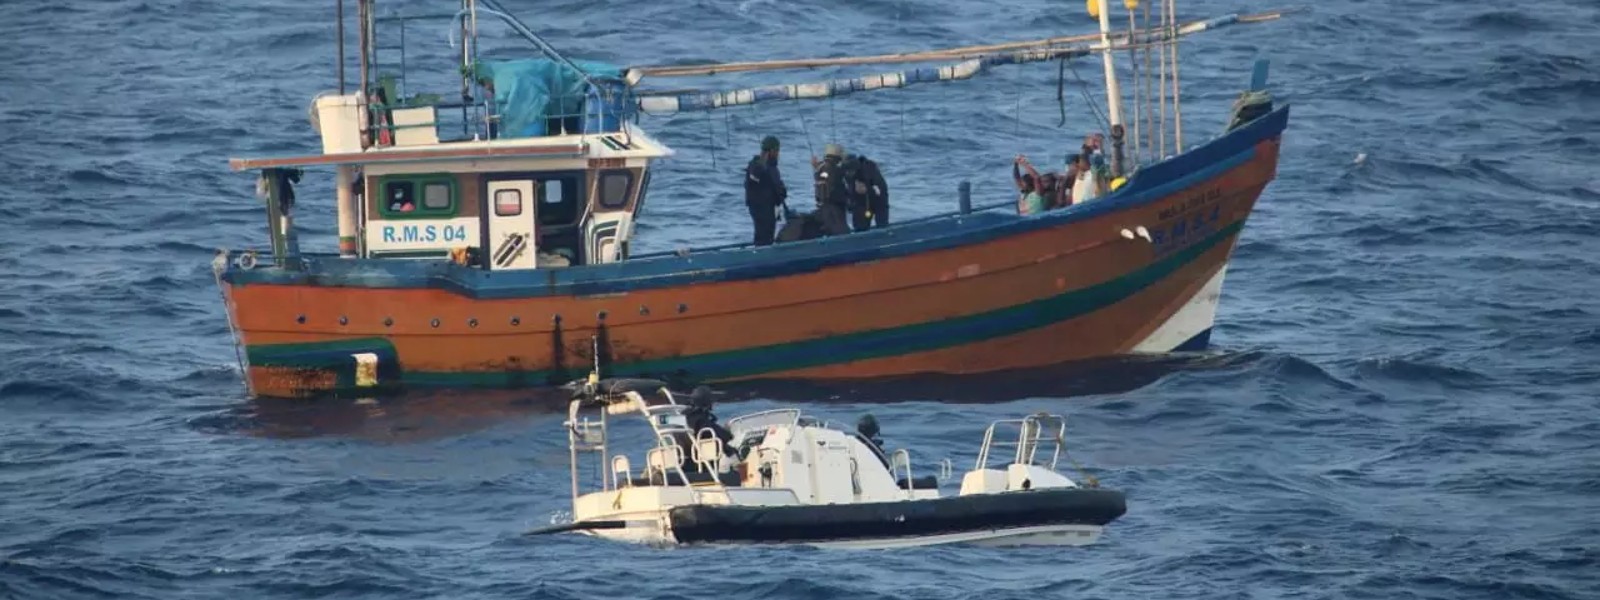 Eleven Lankan fishermen arrested by India CG